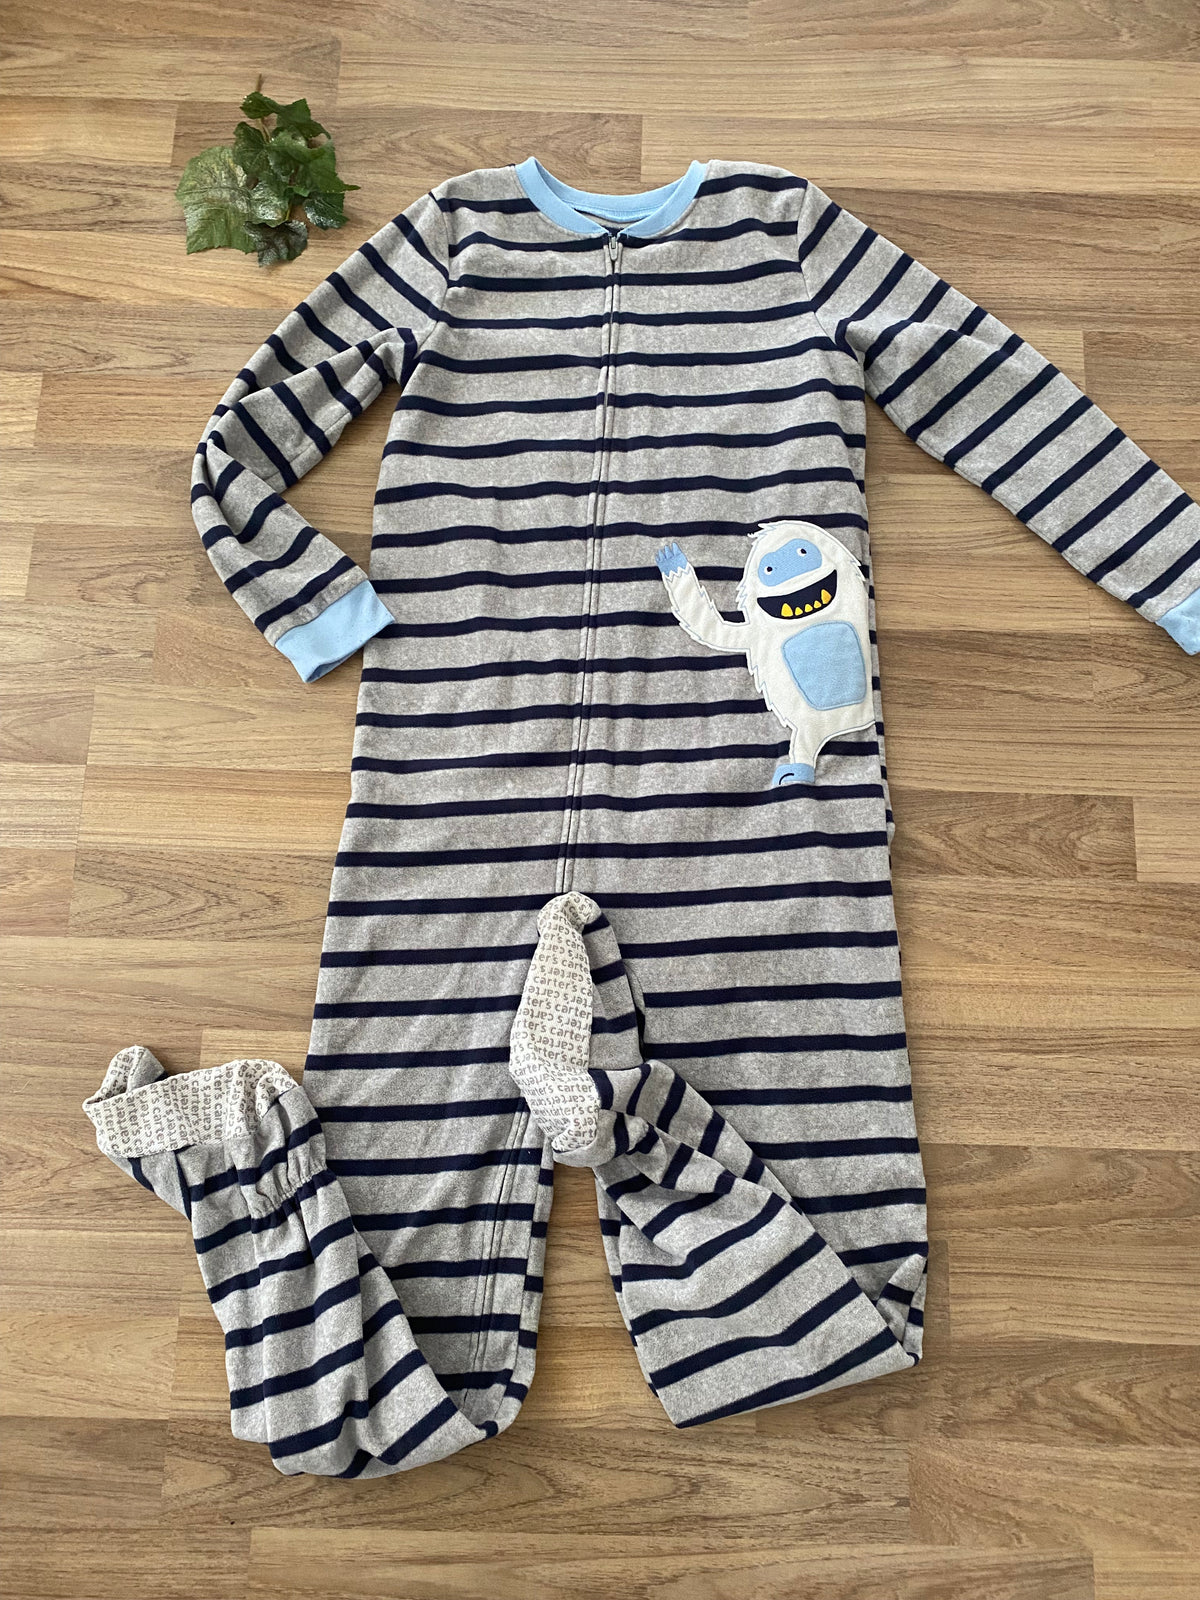 One Piece Footed PJ&#39;s (Boys Size 10)